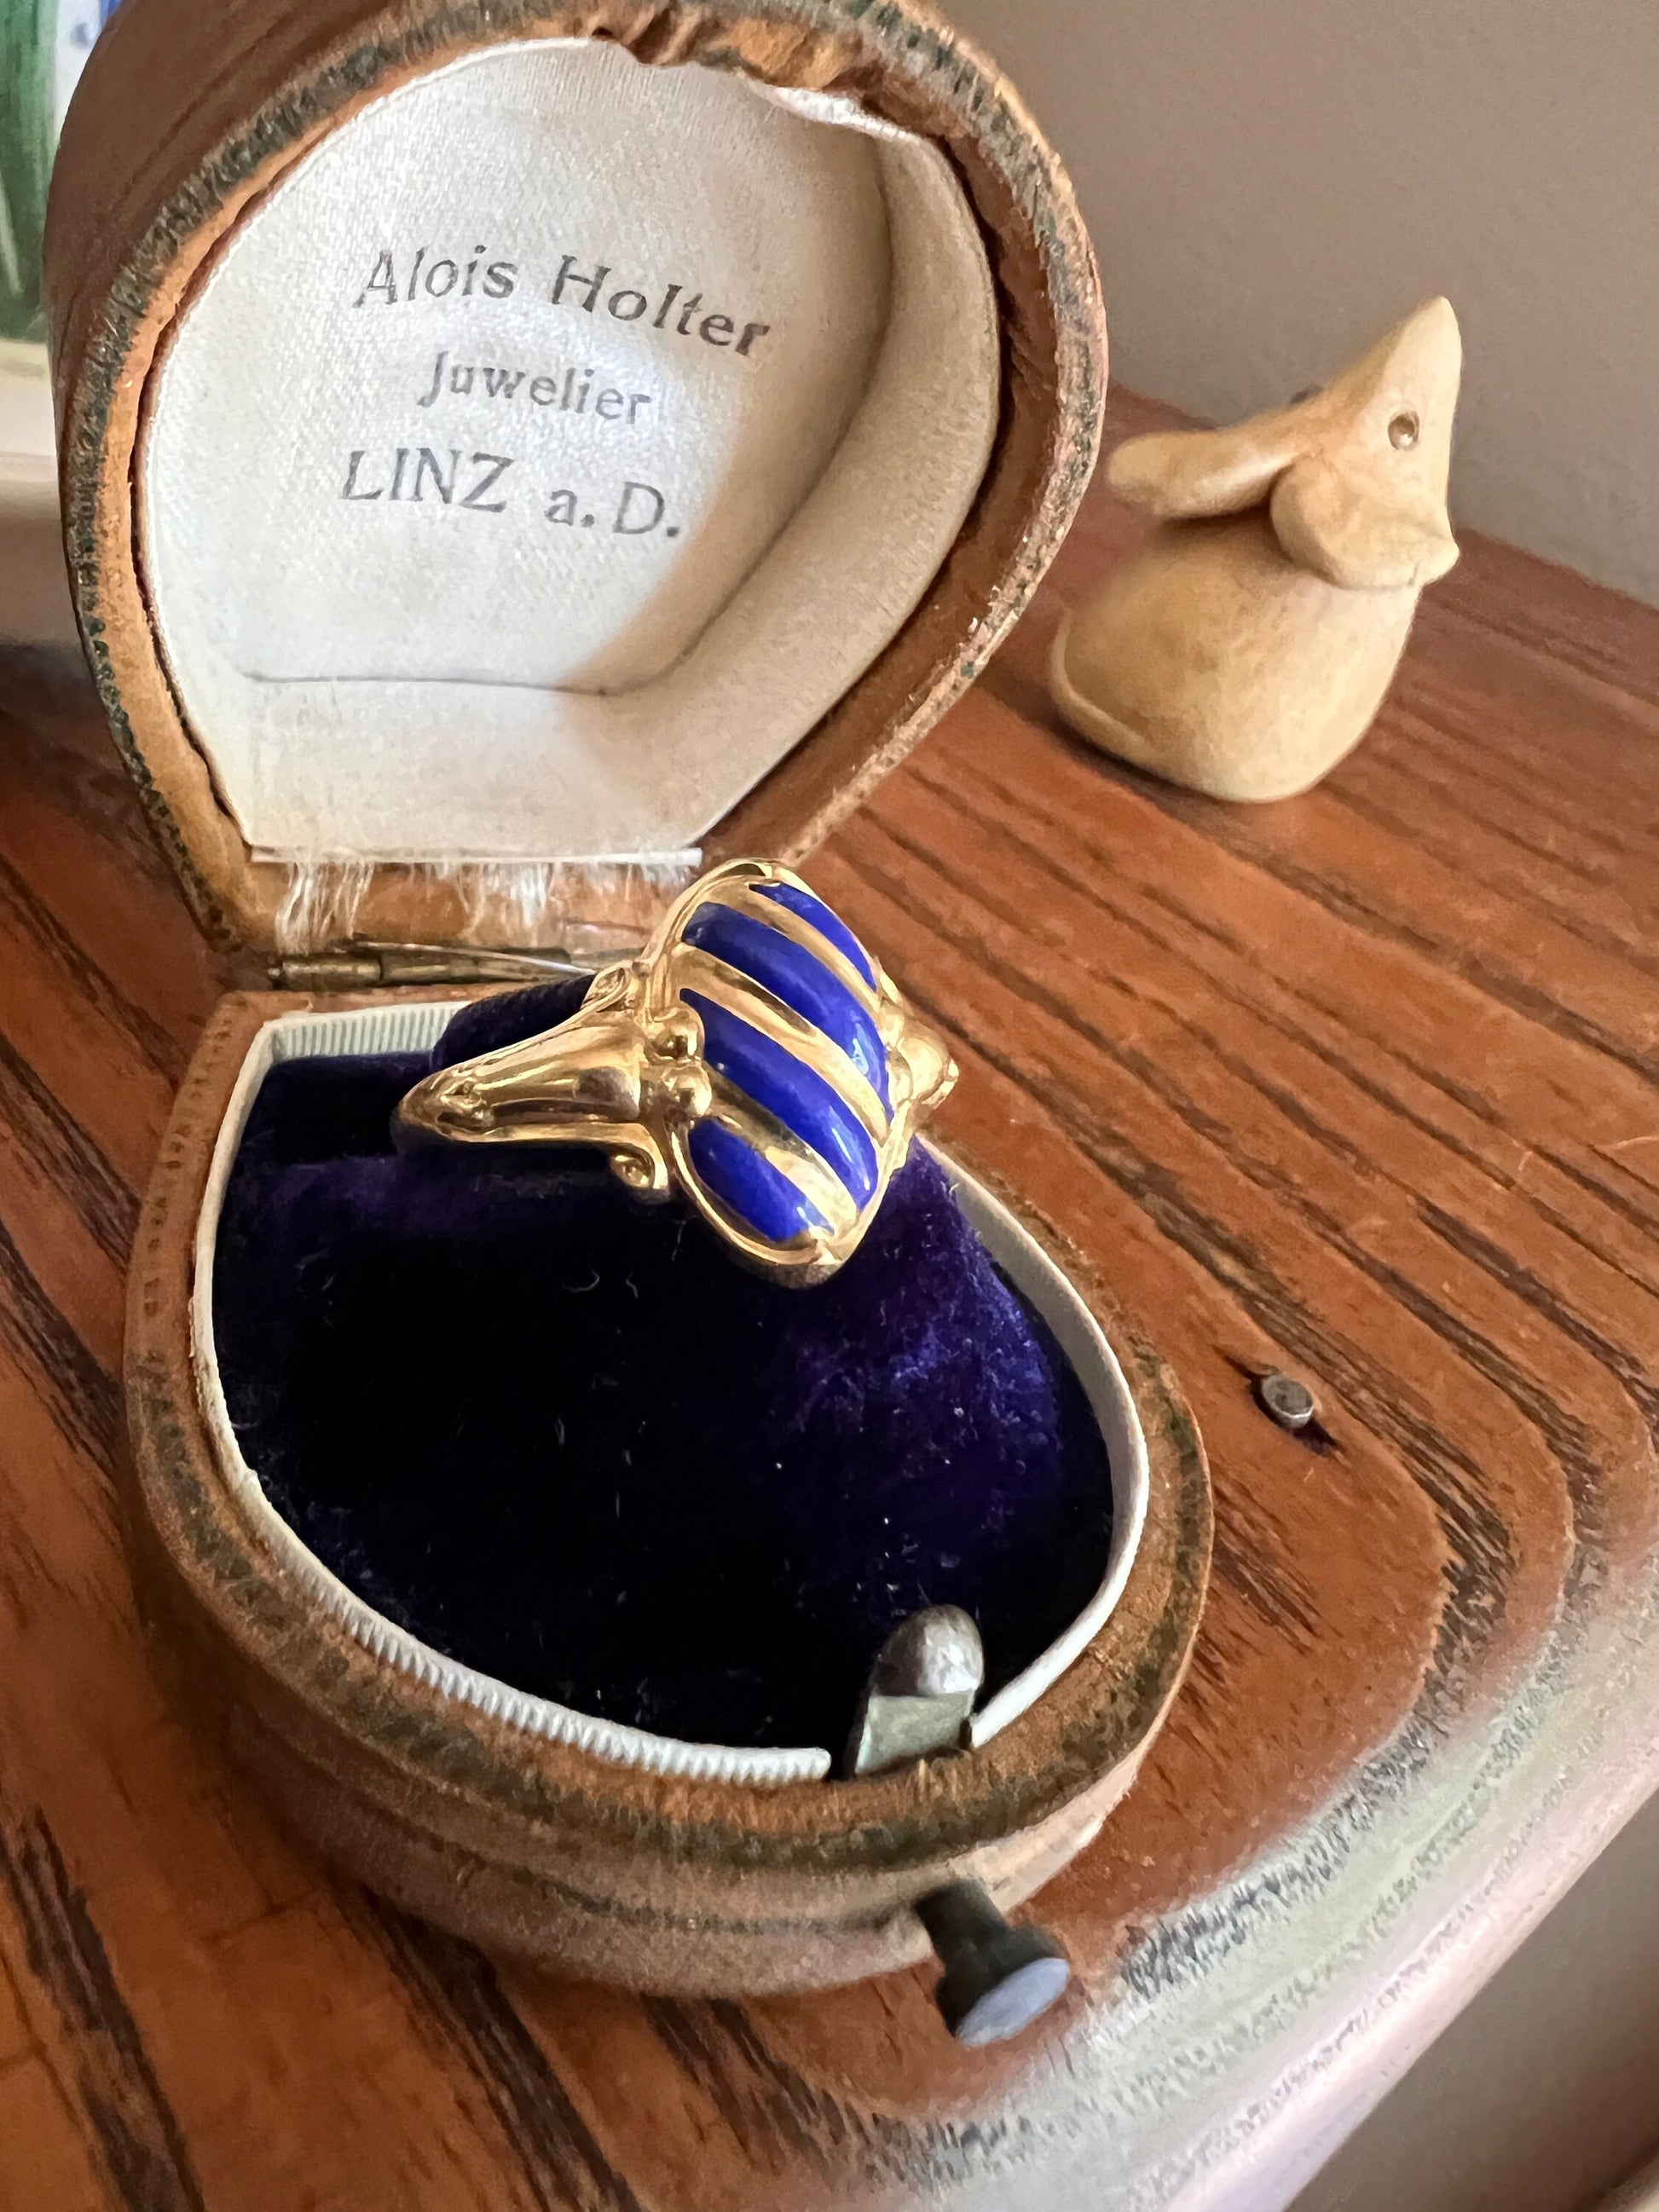 Antique STRIPED Blue Enamel Oval Ornate Victorian Ring 18k Gold French Belle Epoque Stacker Romantic Gift Linear Geometric Scrolled Signet